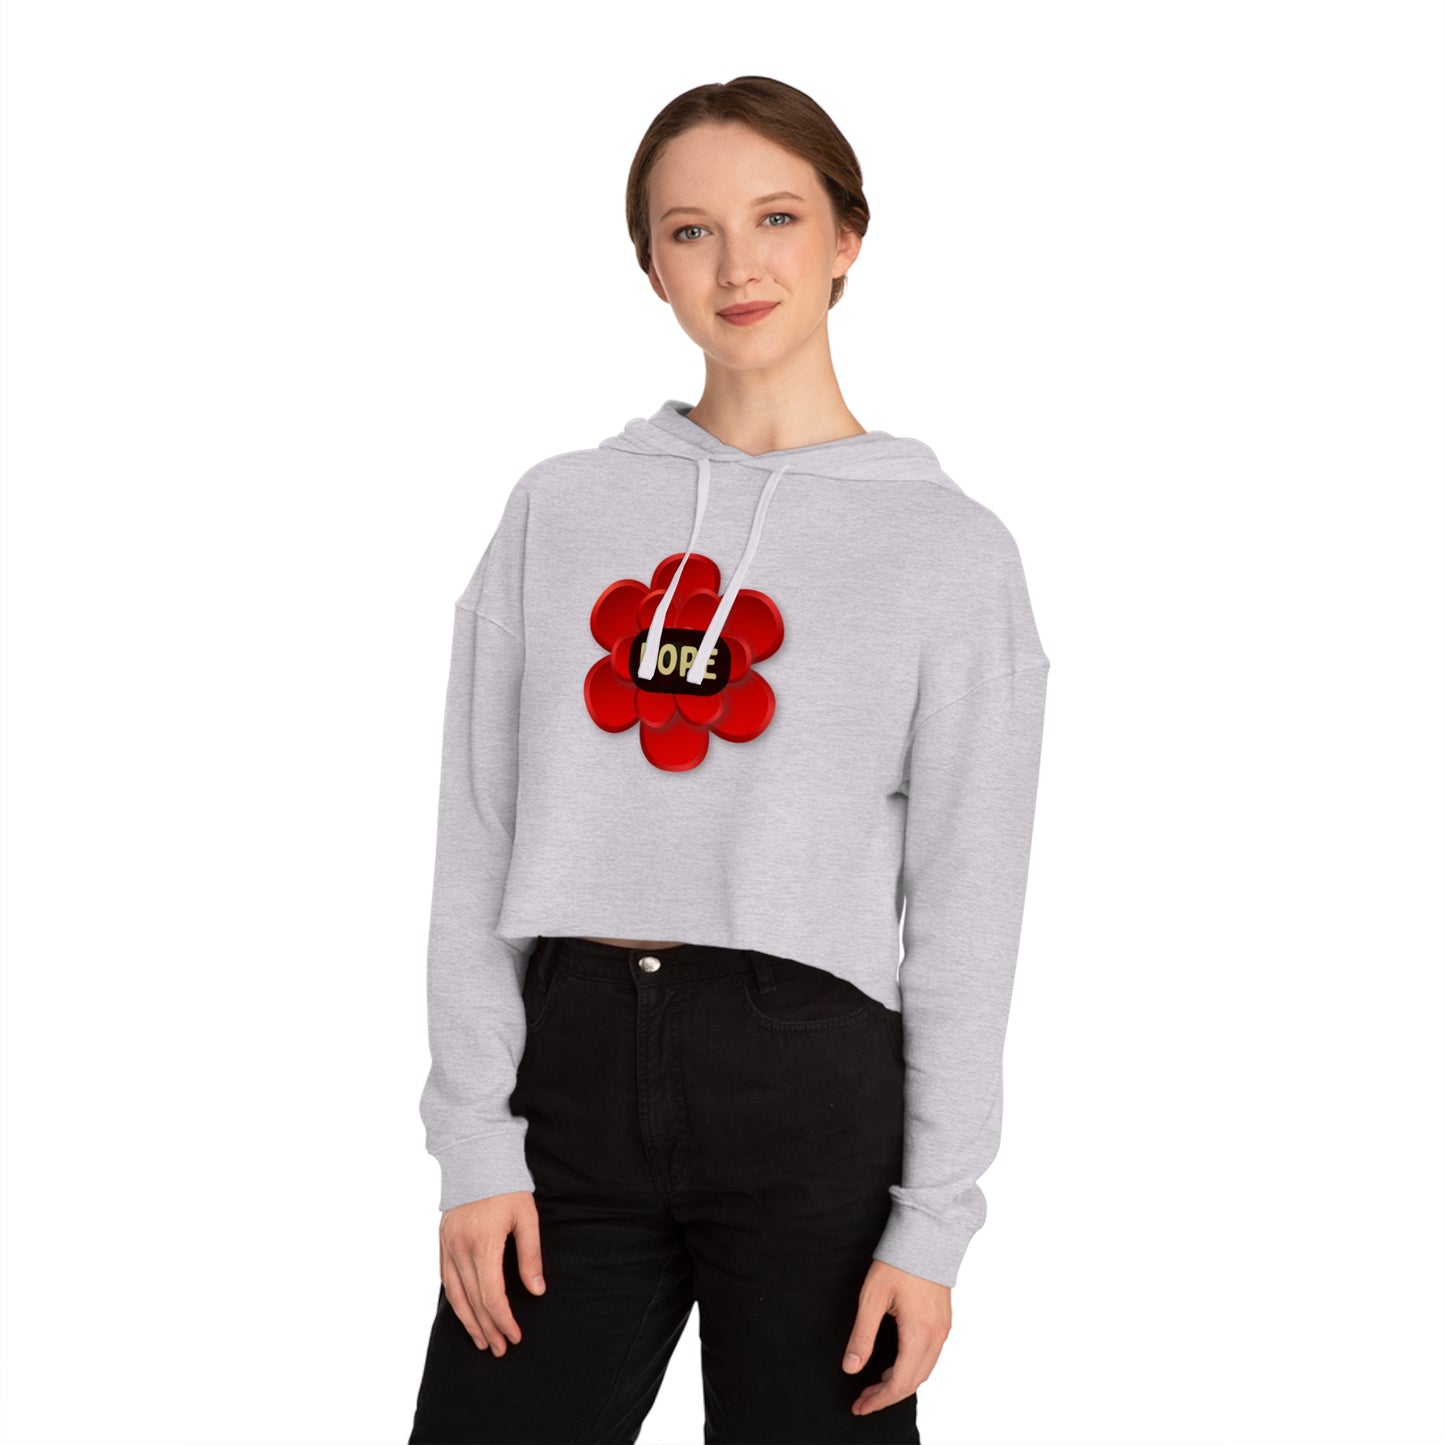 Bright “HOPE” with within red flower design on this stylish Women’s Cropped Hooded Sweatshirt for your enjoyment.